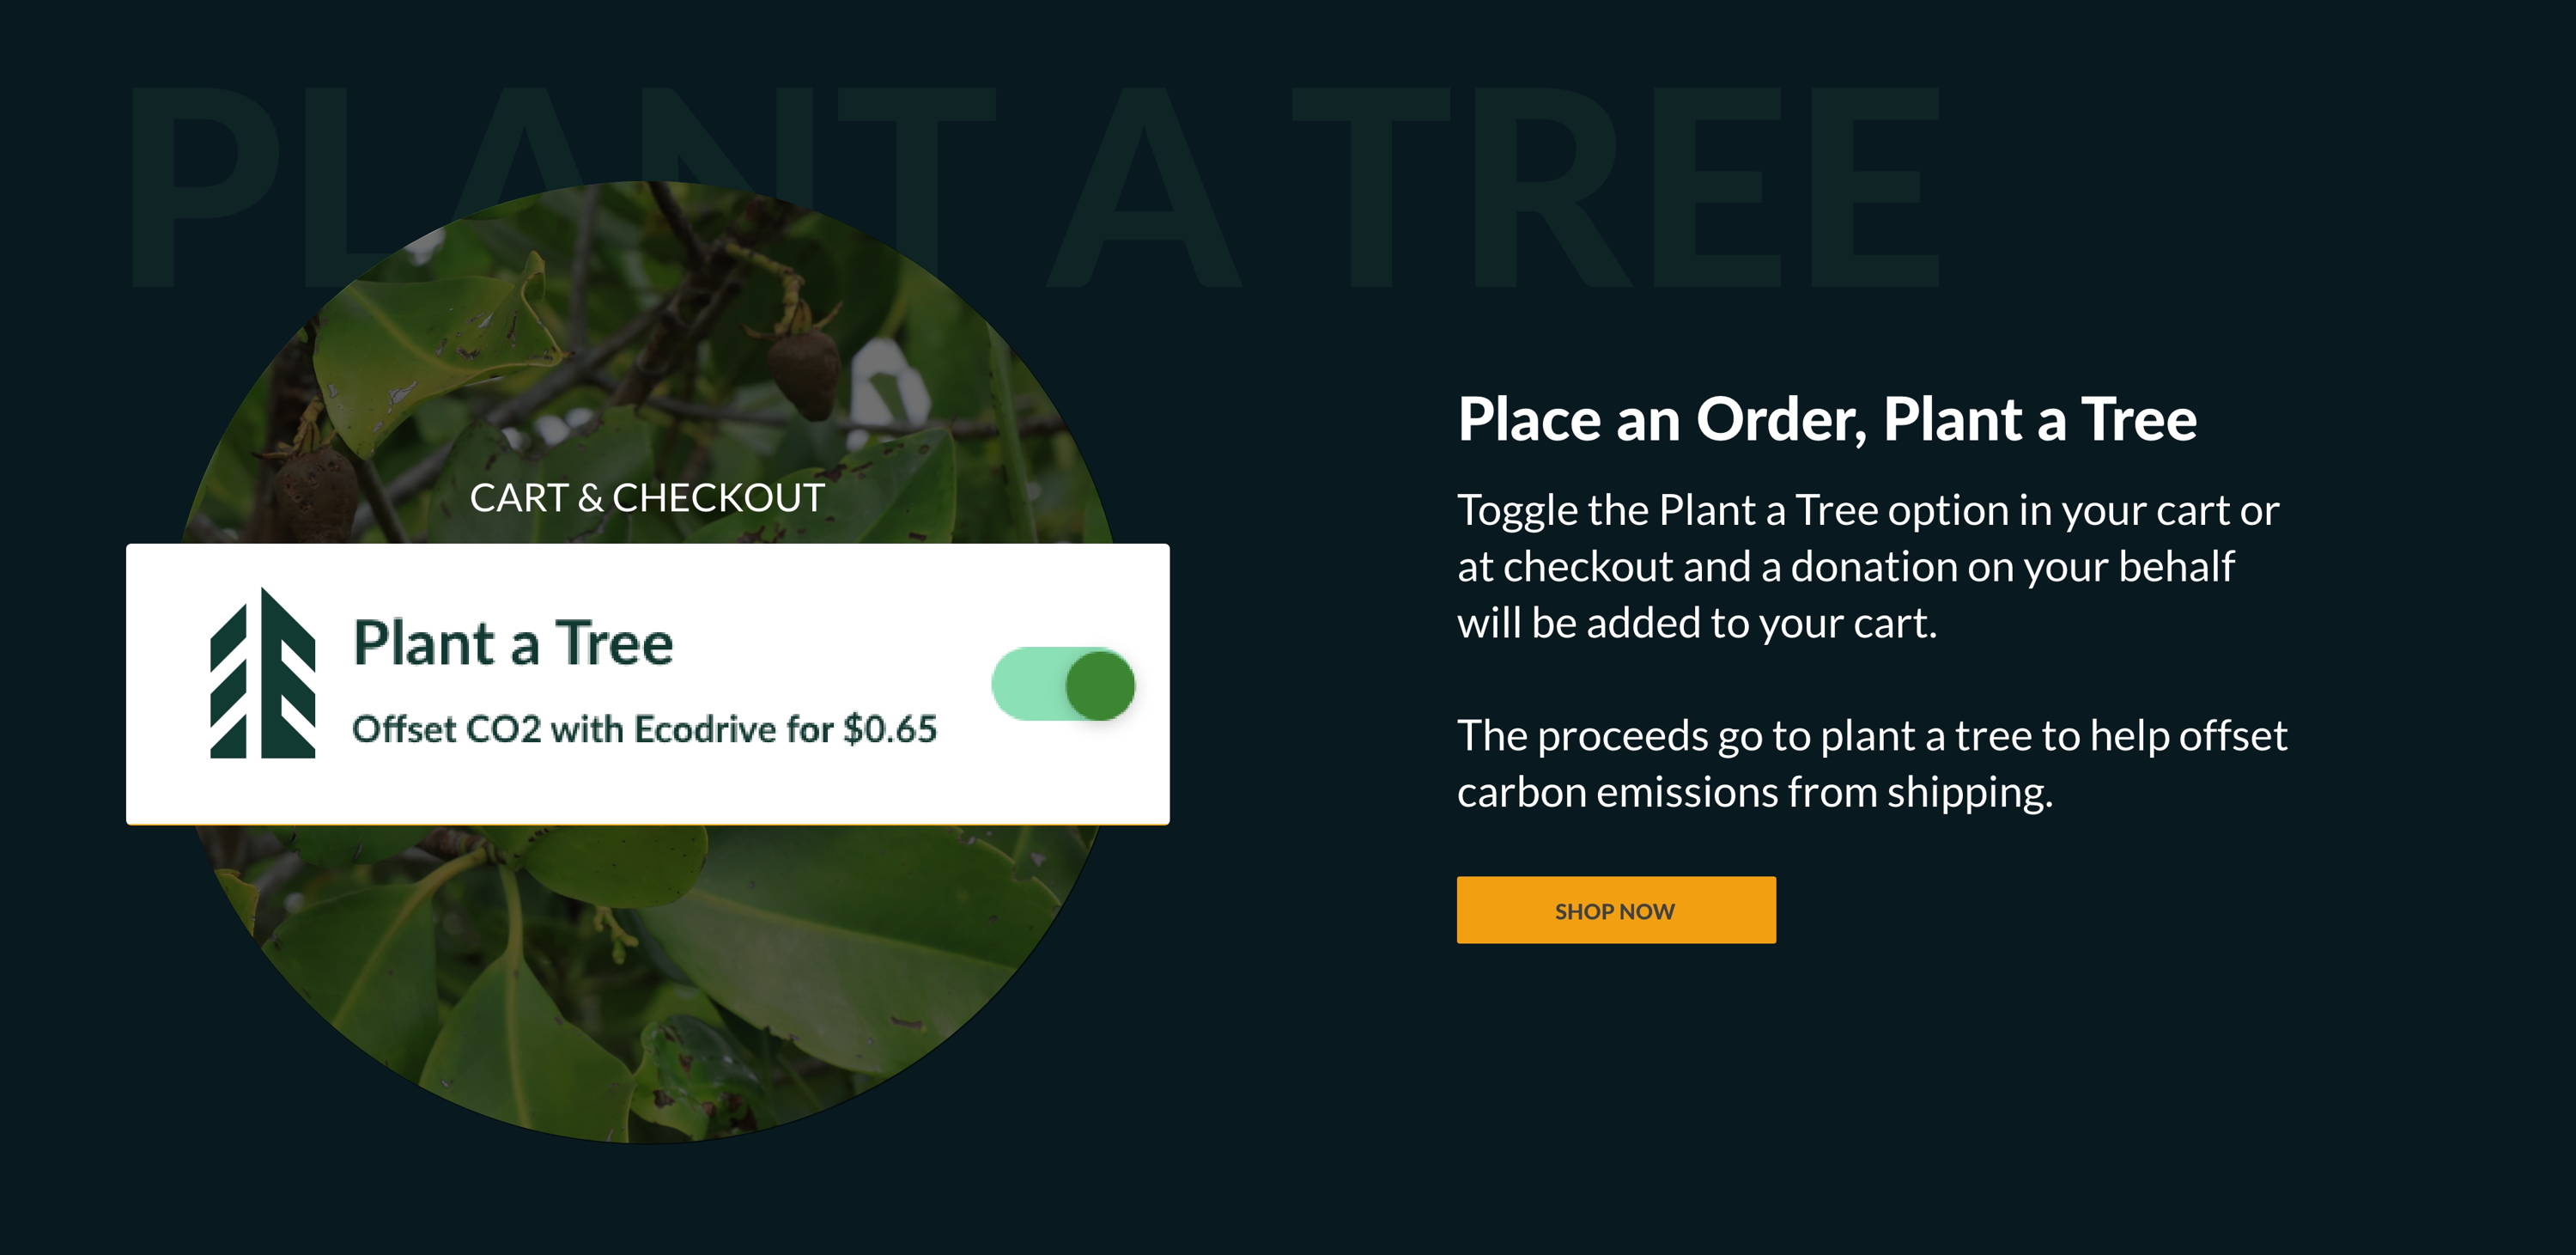 Place an Order Plant a Tree